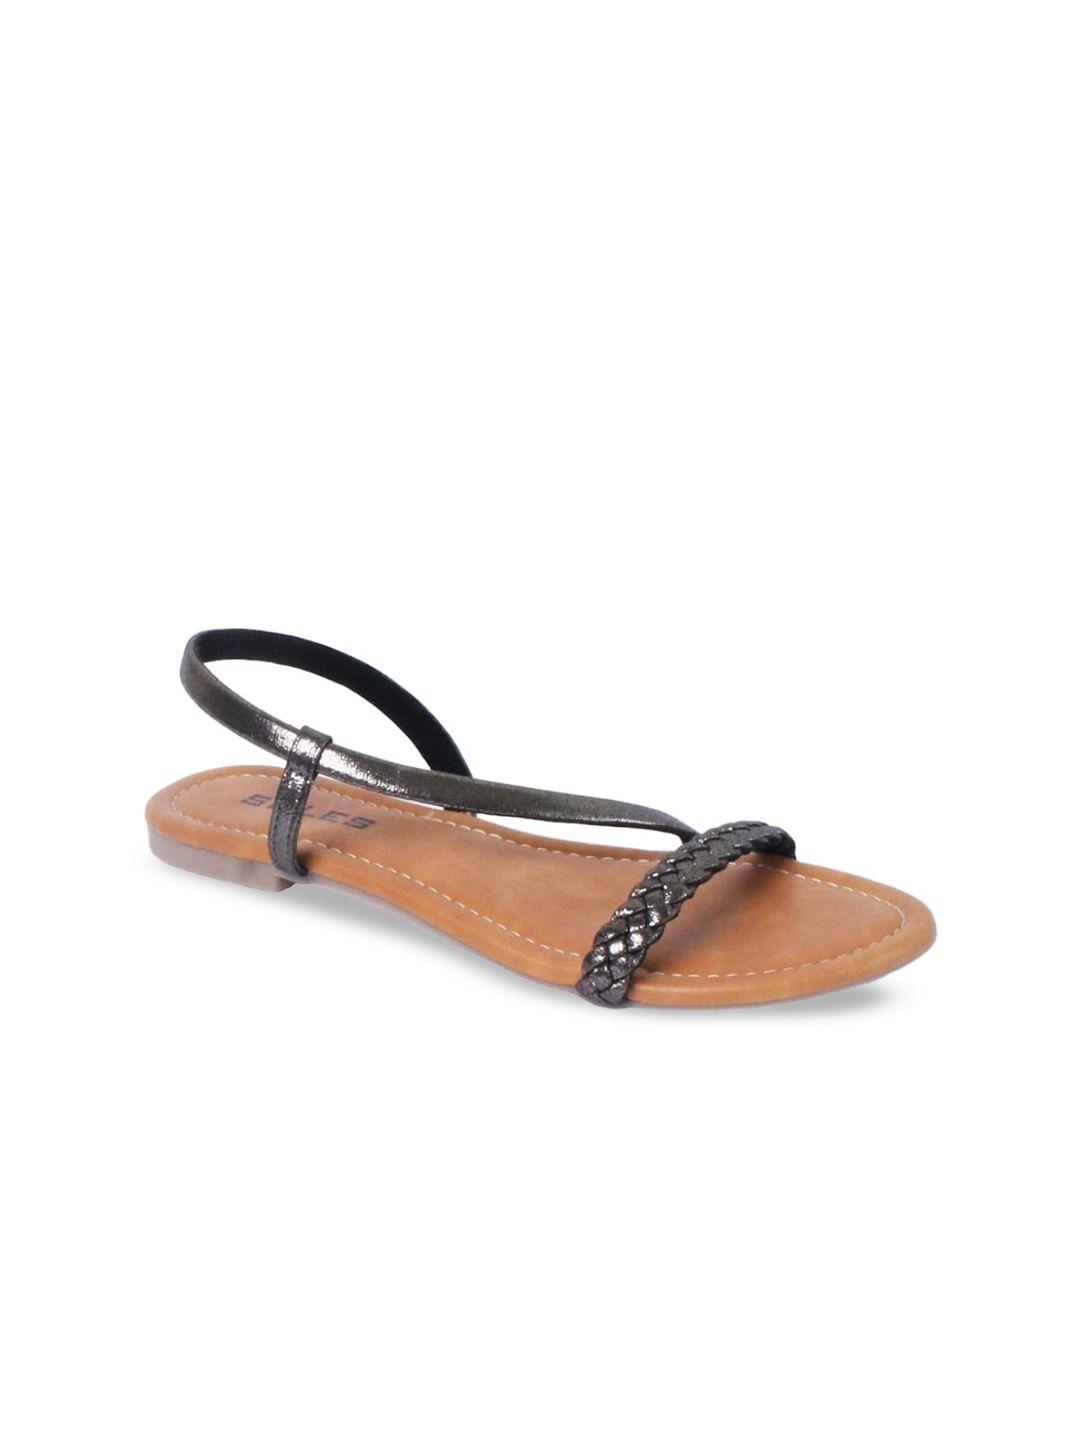 soles braided open toe flats with backstrap